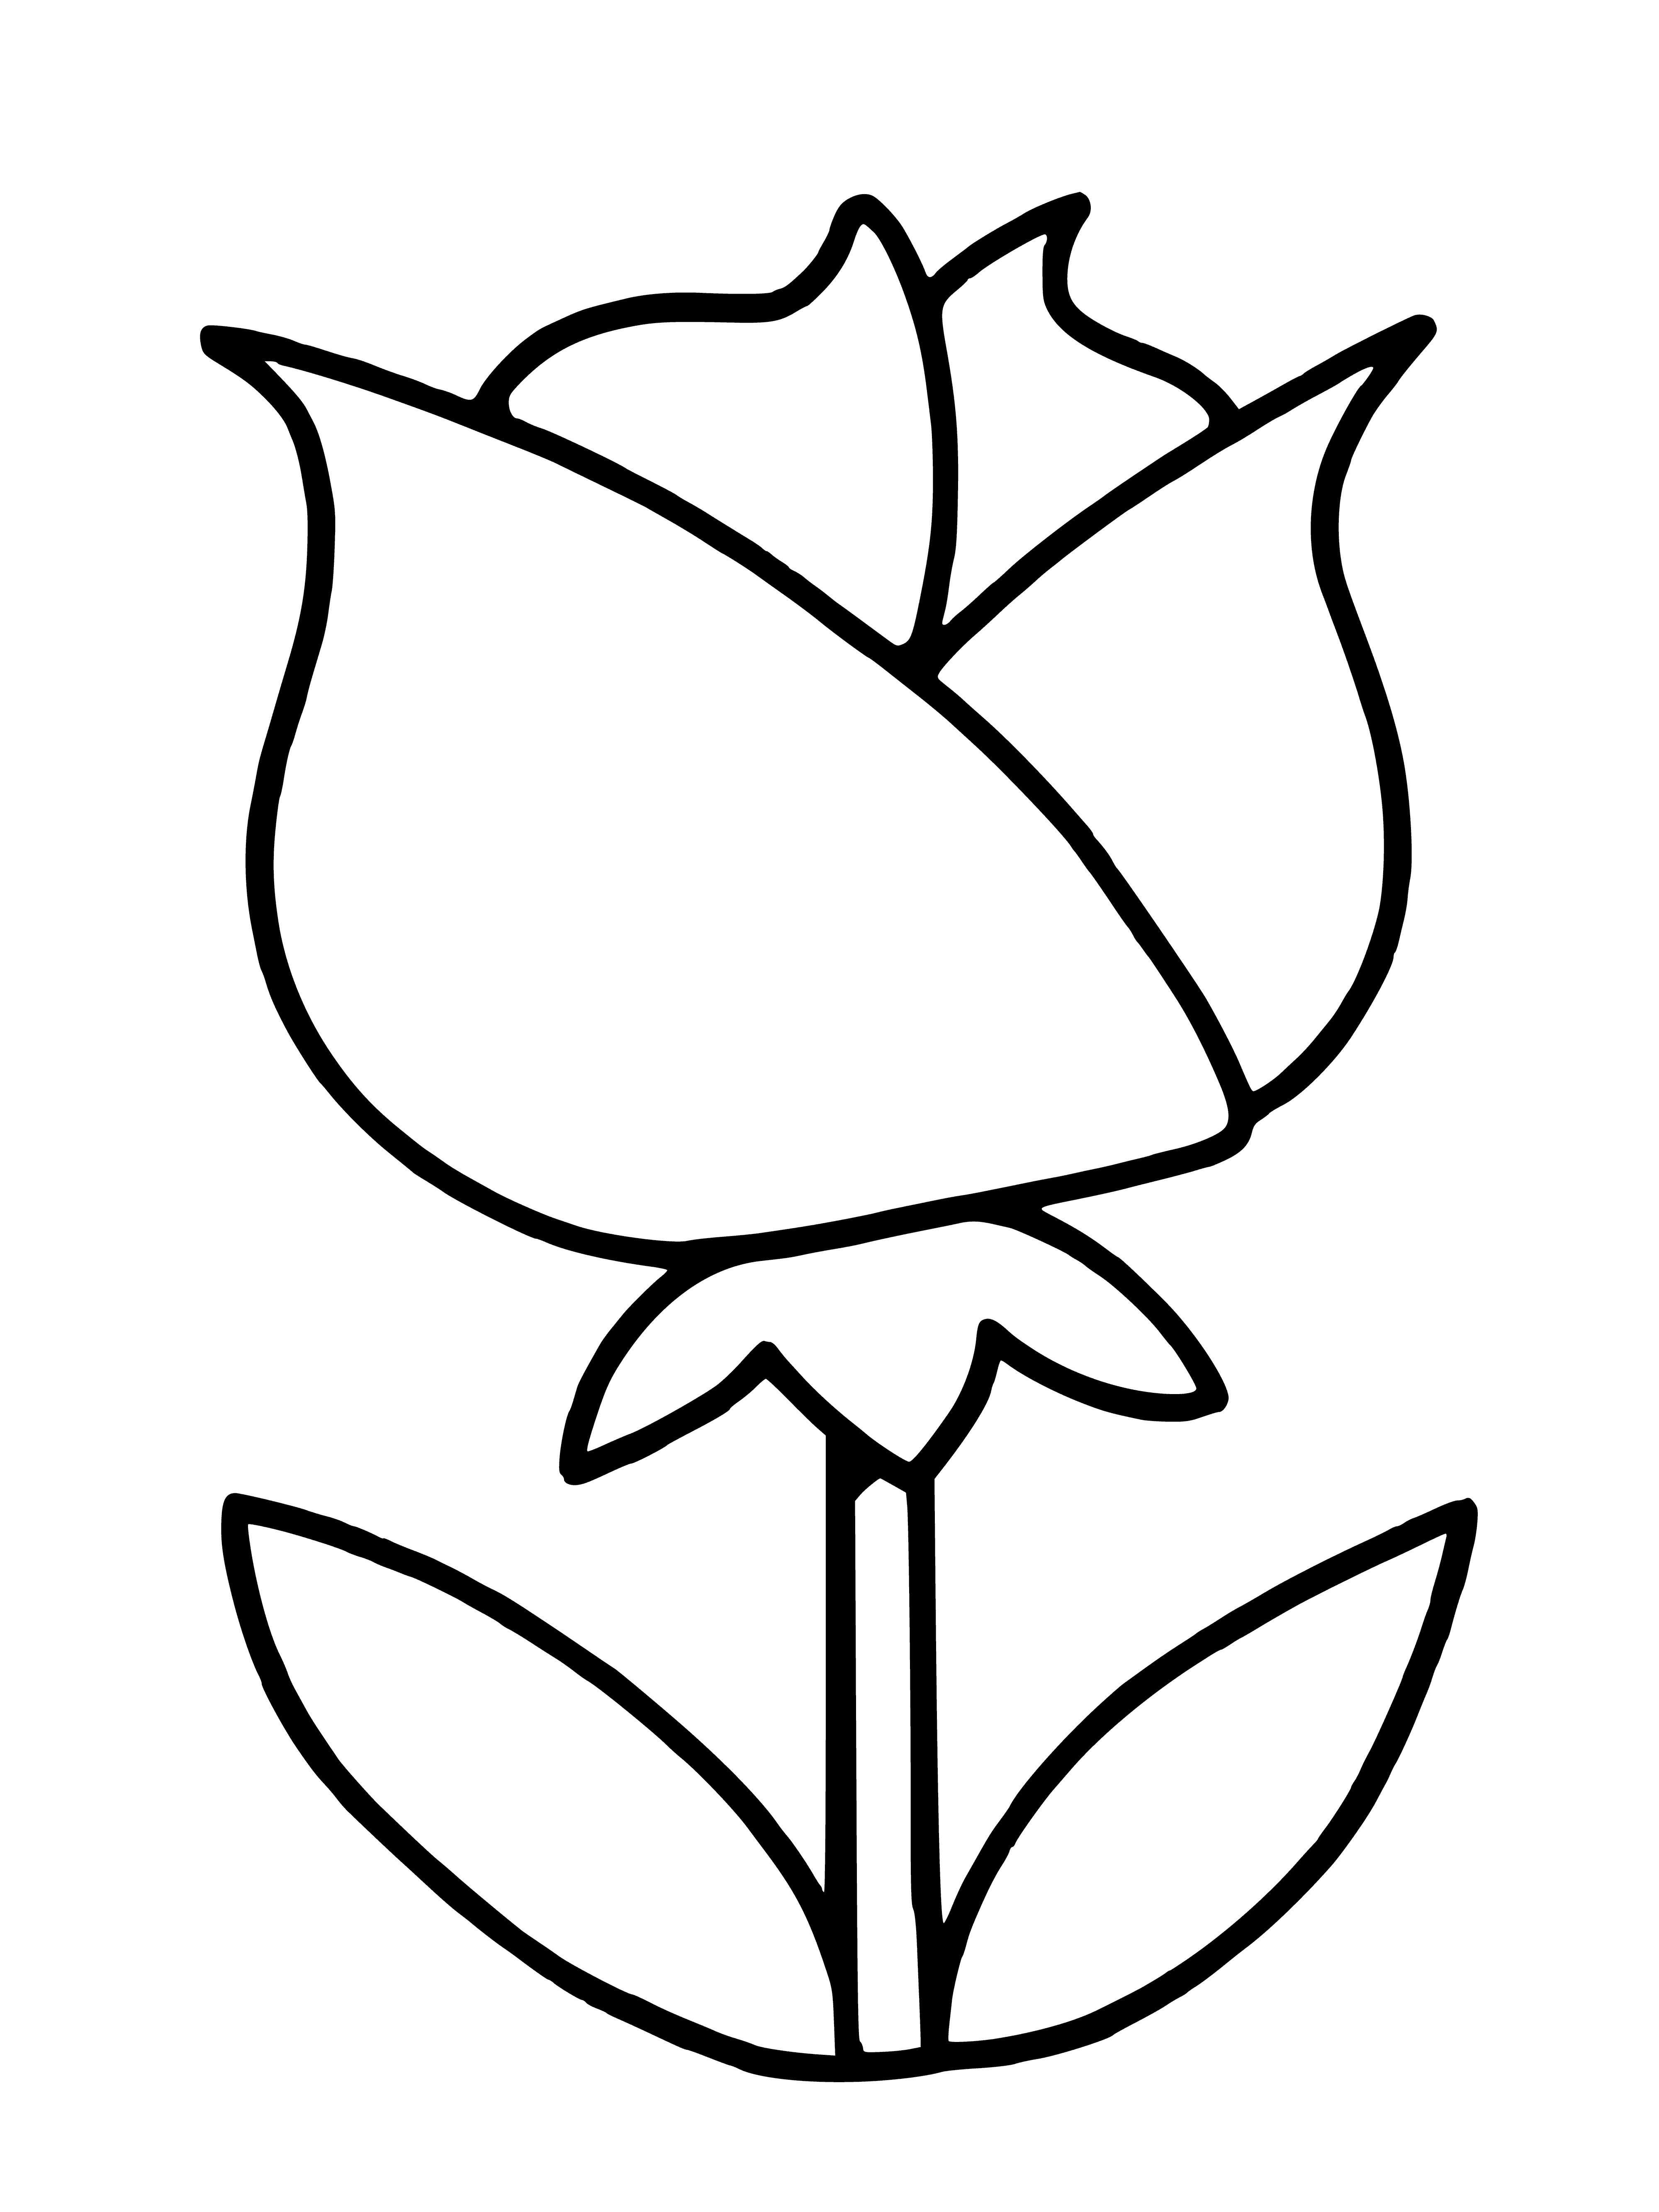 the Rose coloring page